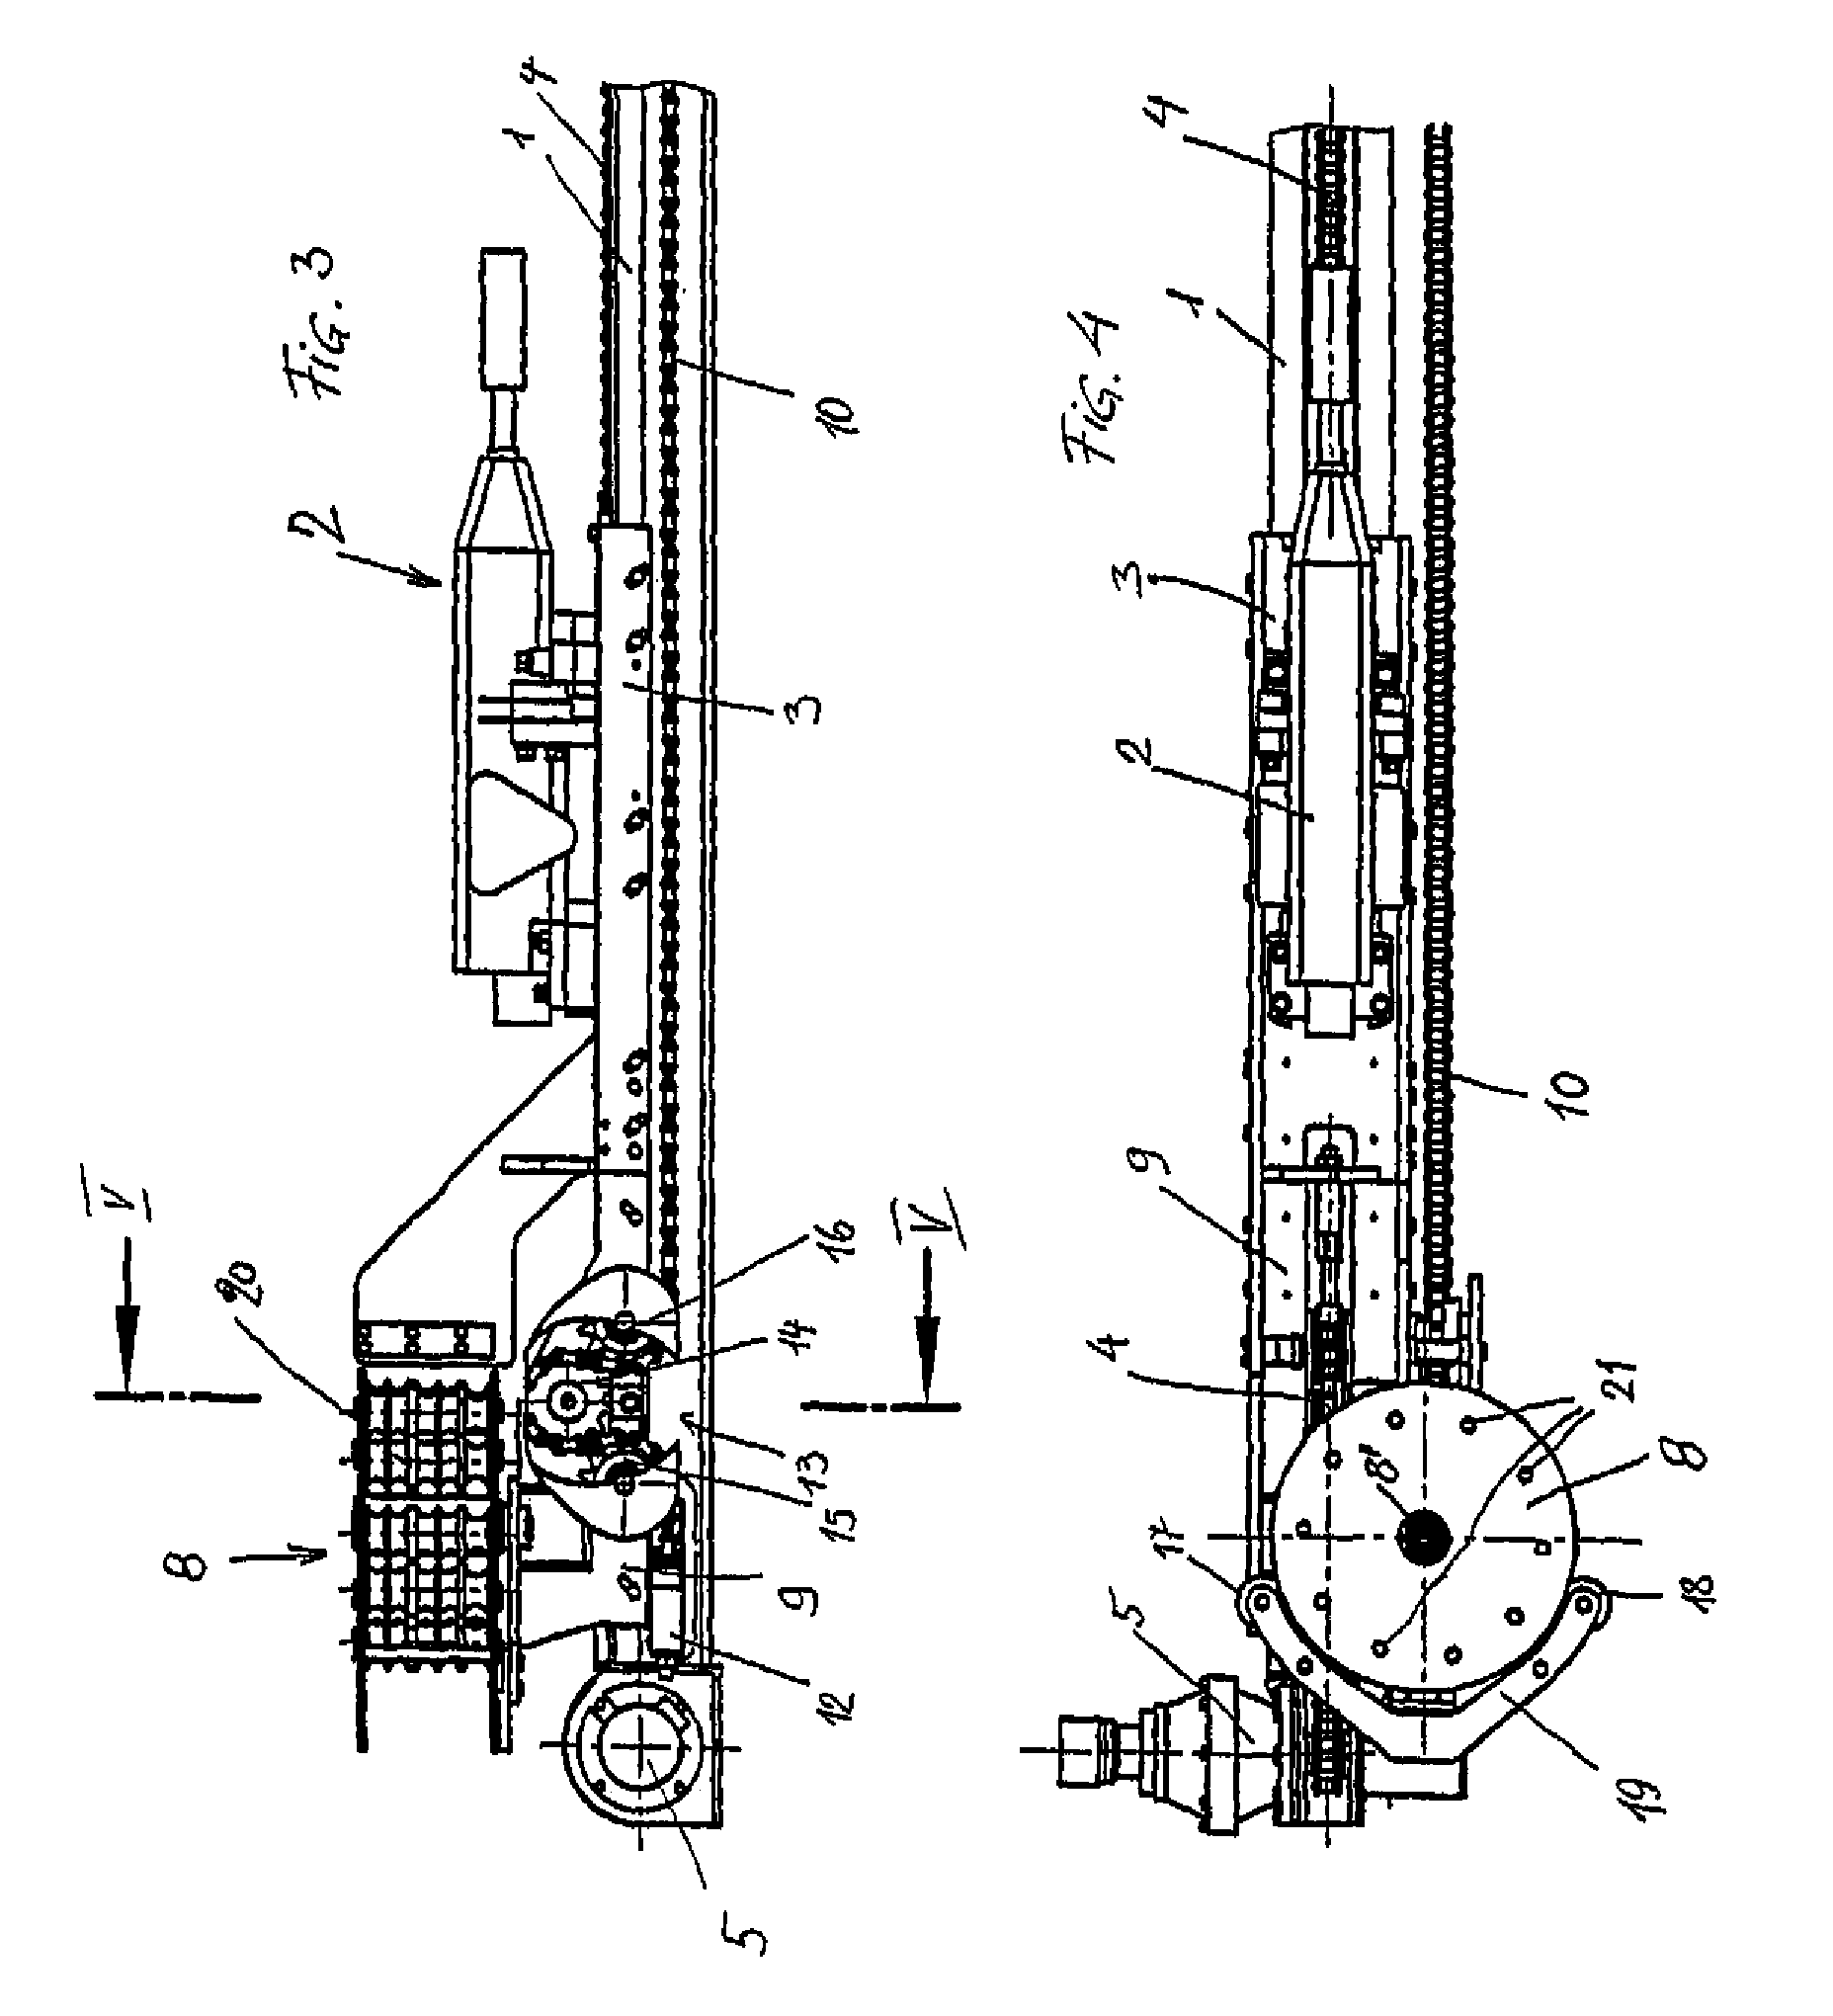 Device for guiding and tensioning supply lines